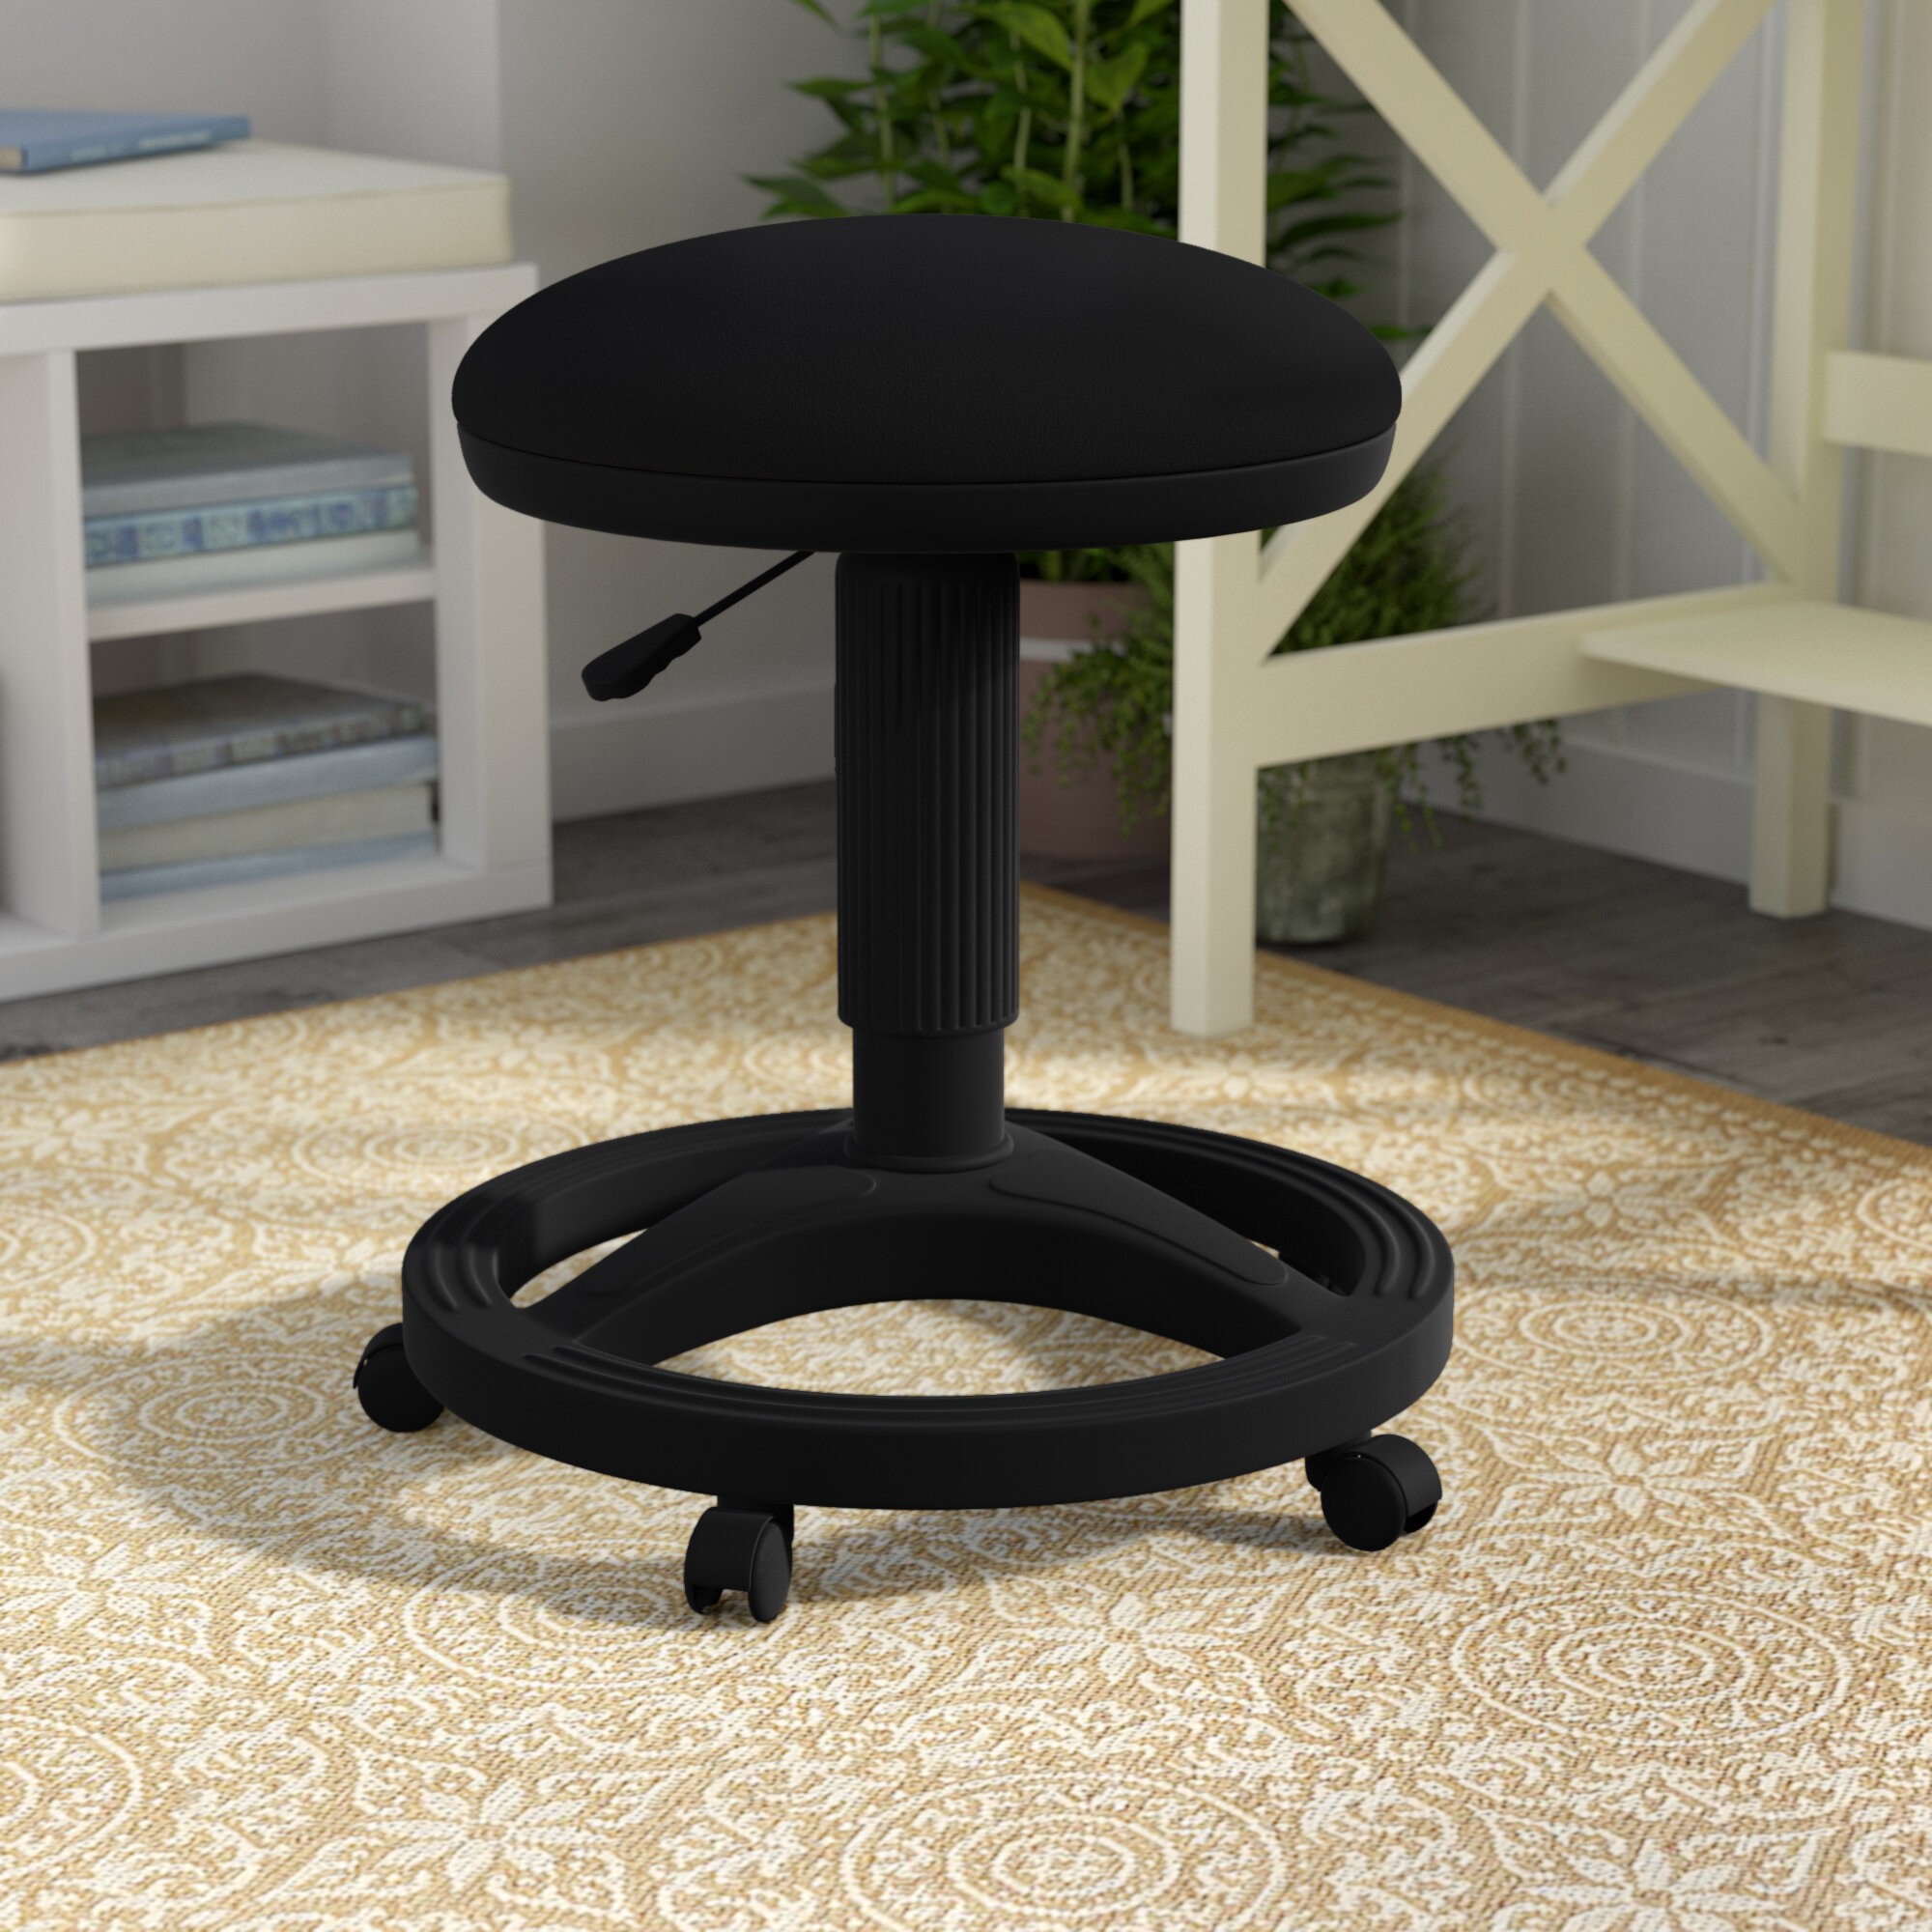 Gutierres Height Adjustable Stool with Footring